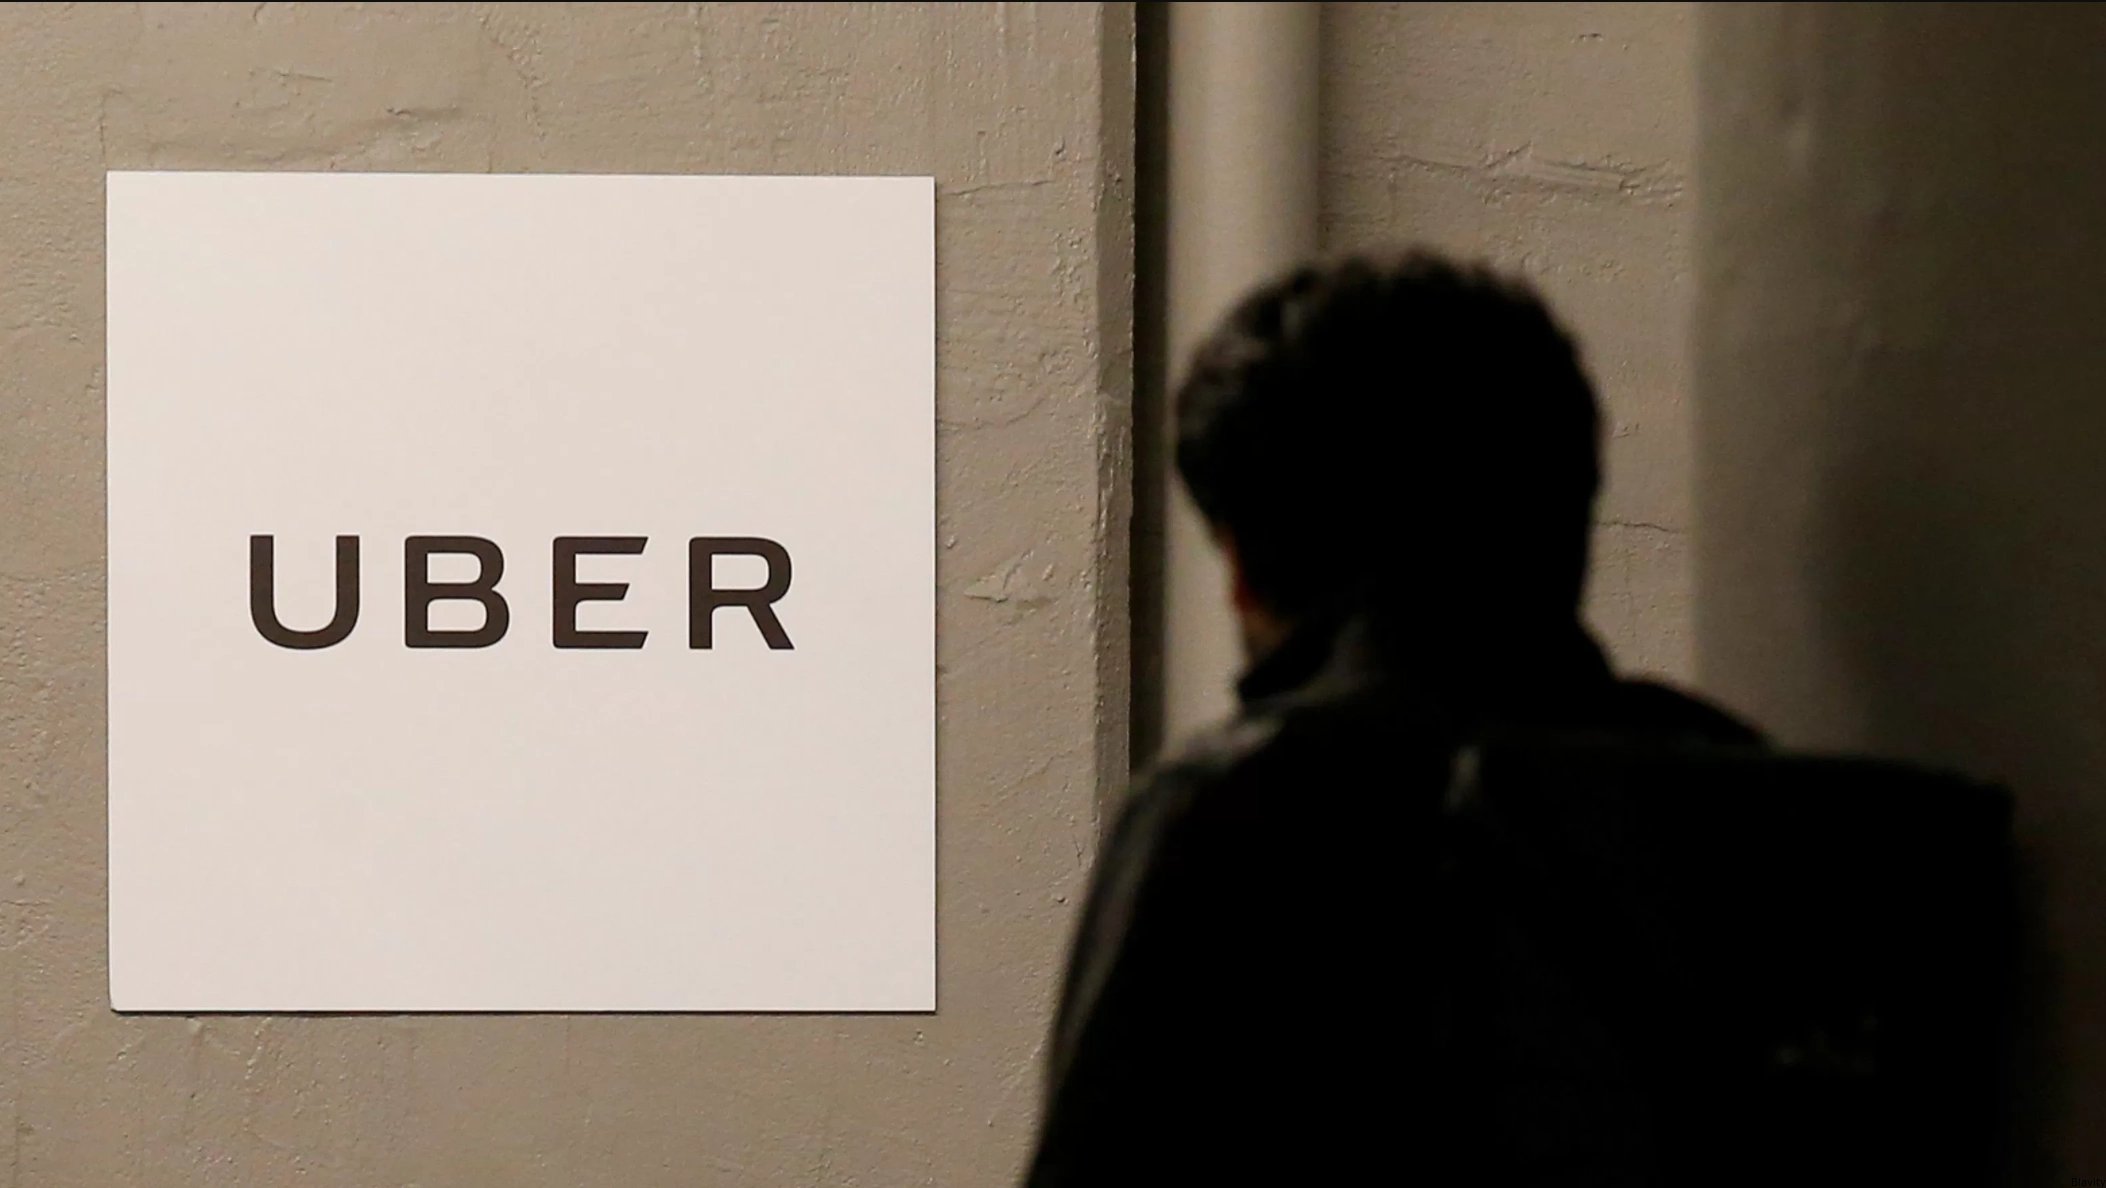 Uber Had 57 Million Accounts Stolen From It Last Year In Major Hack, And Paid Hackers To Keep It A Secret